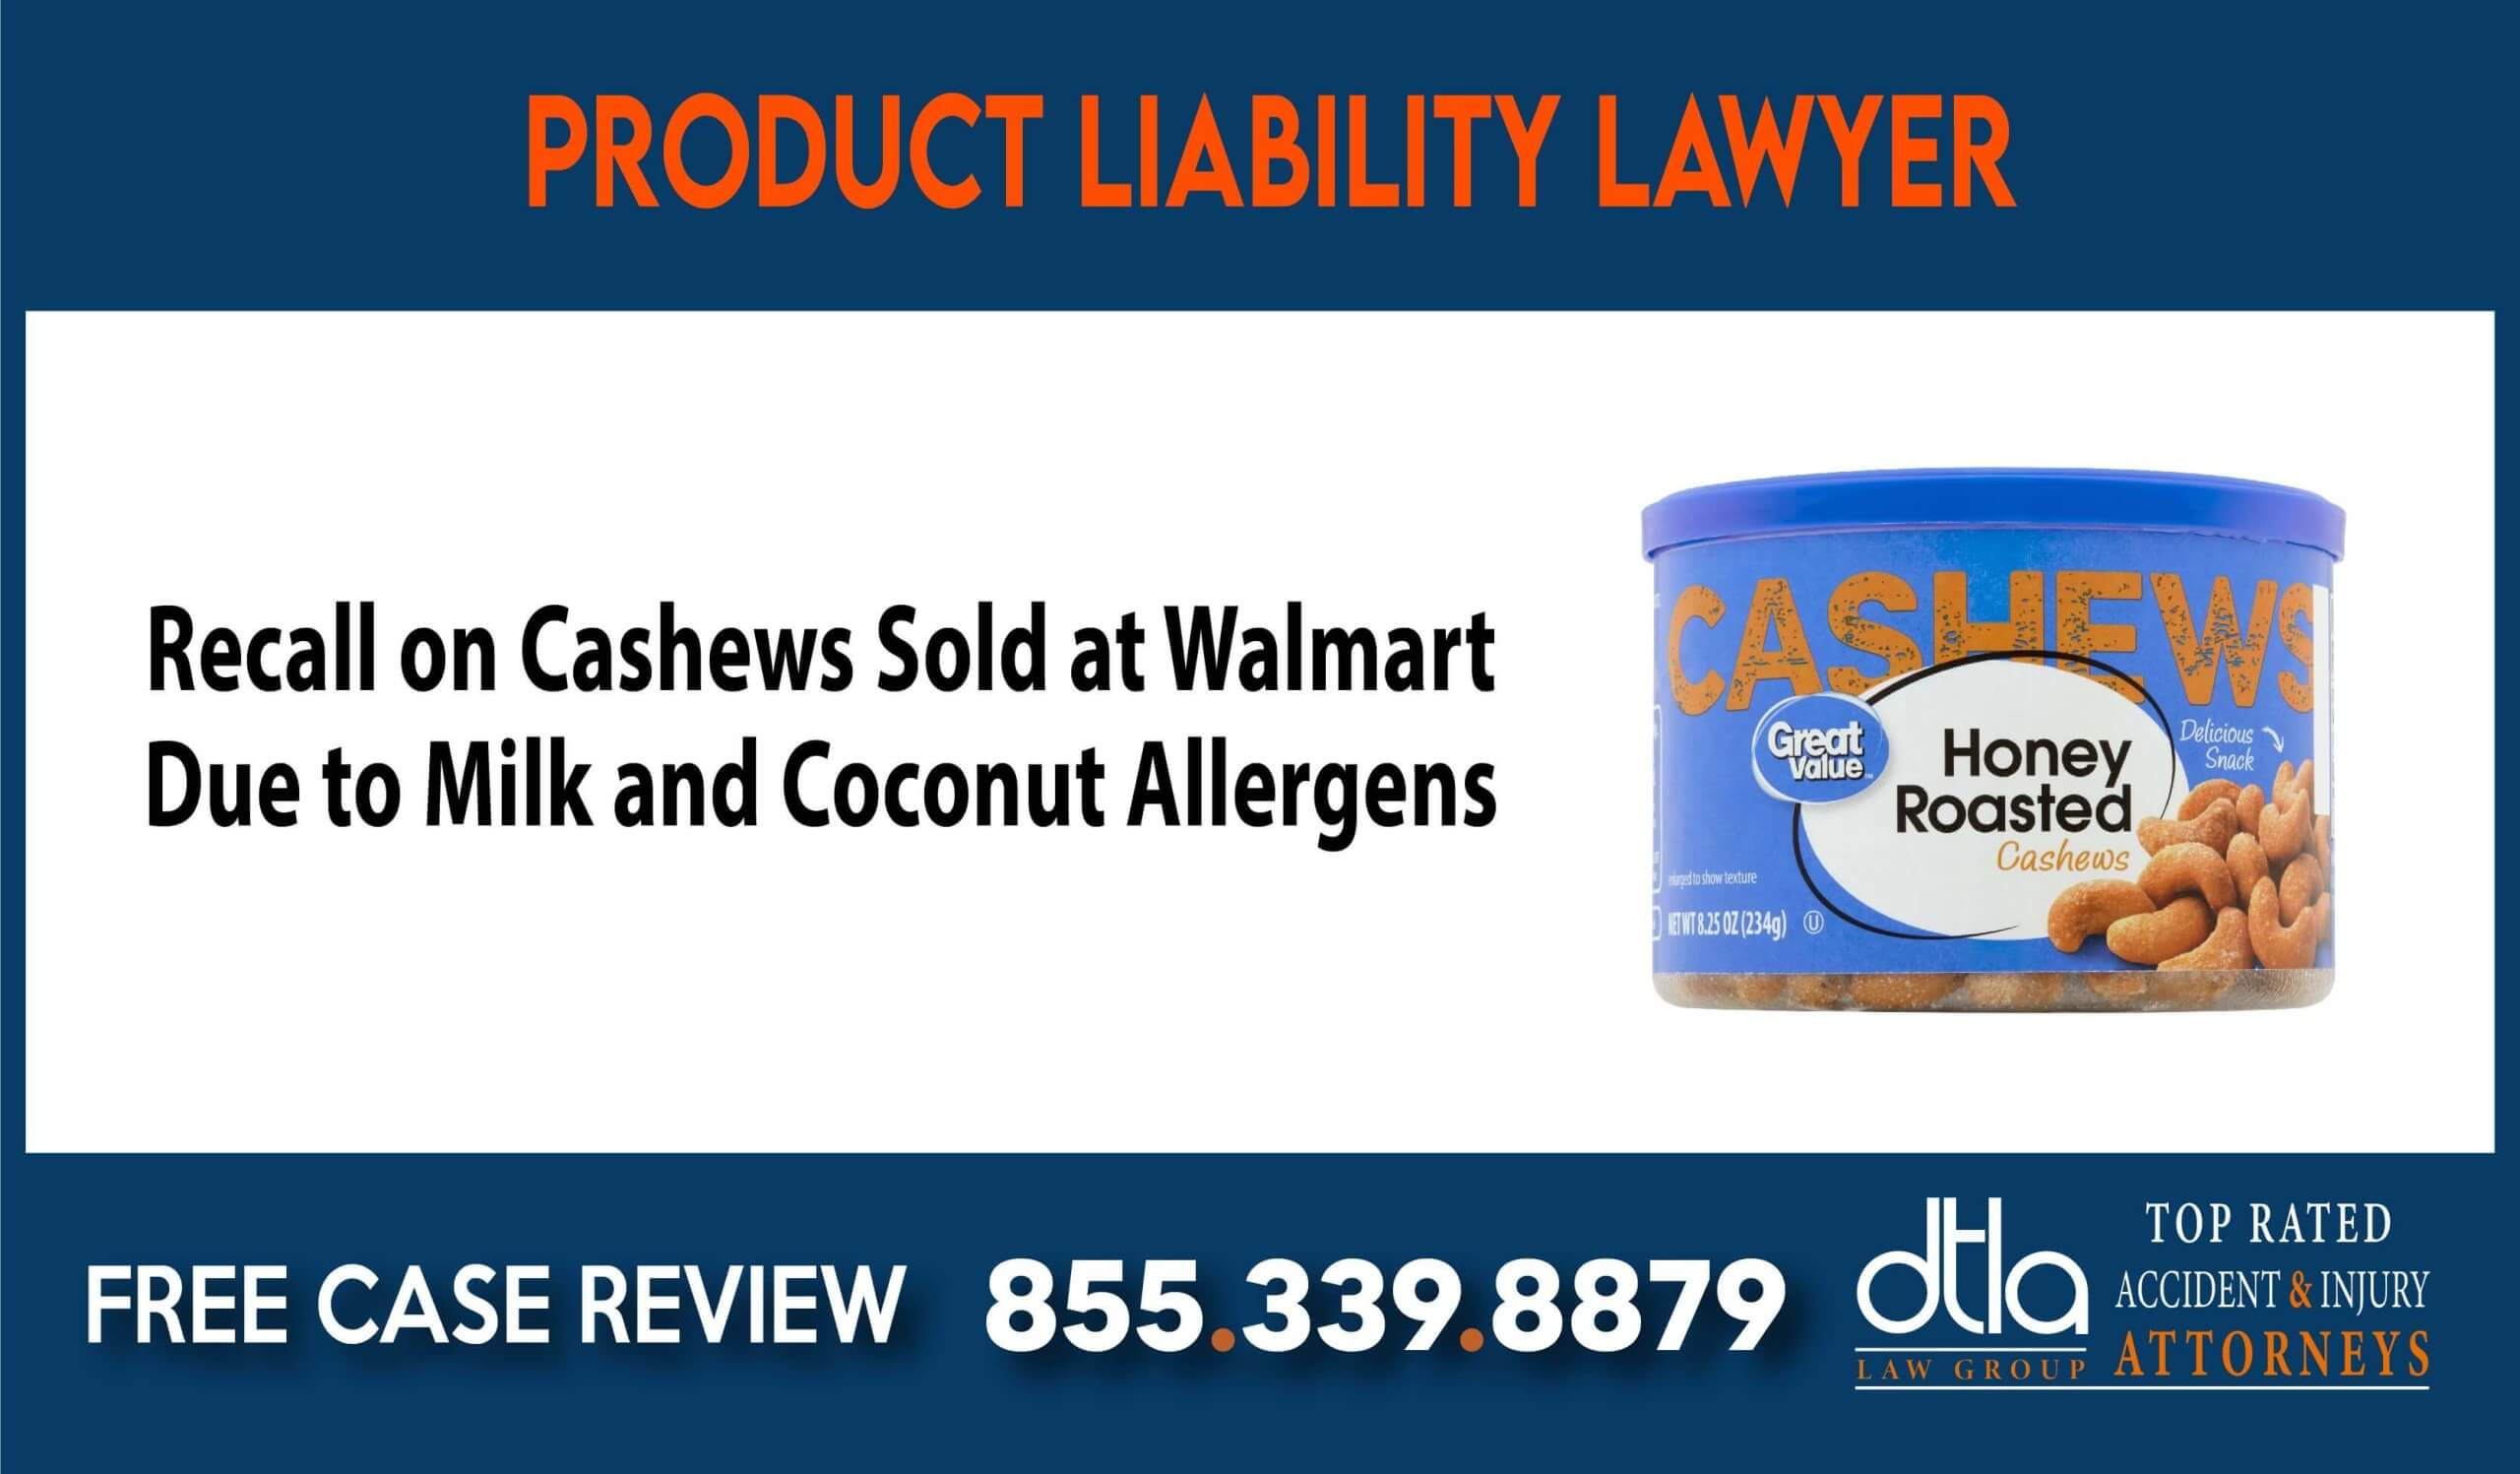 Recall on Cashews Sold at Walmart Due to Milk and Coconut Allergens lawsuit liability compensation lawyer attorney sue